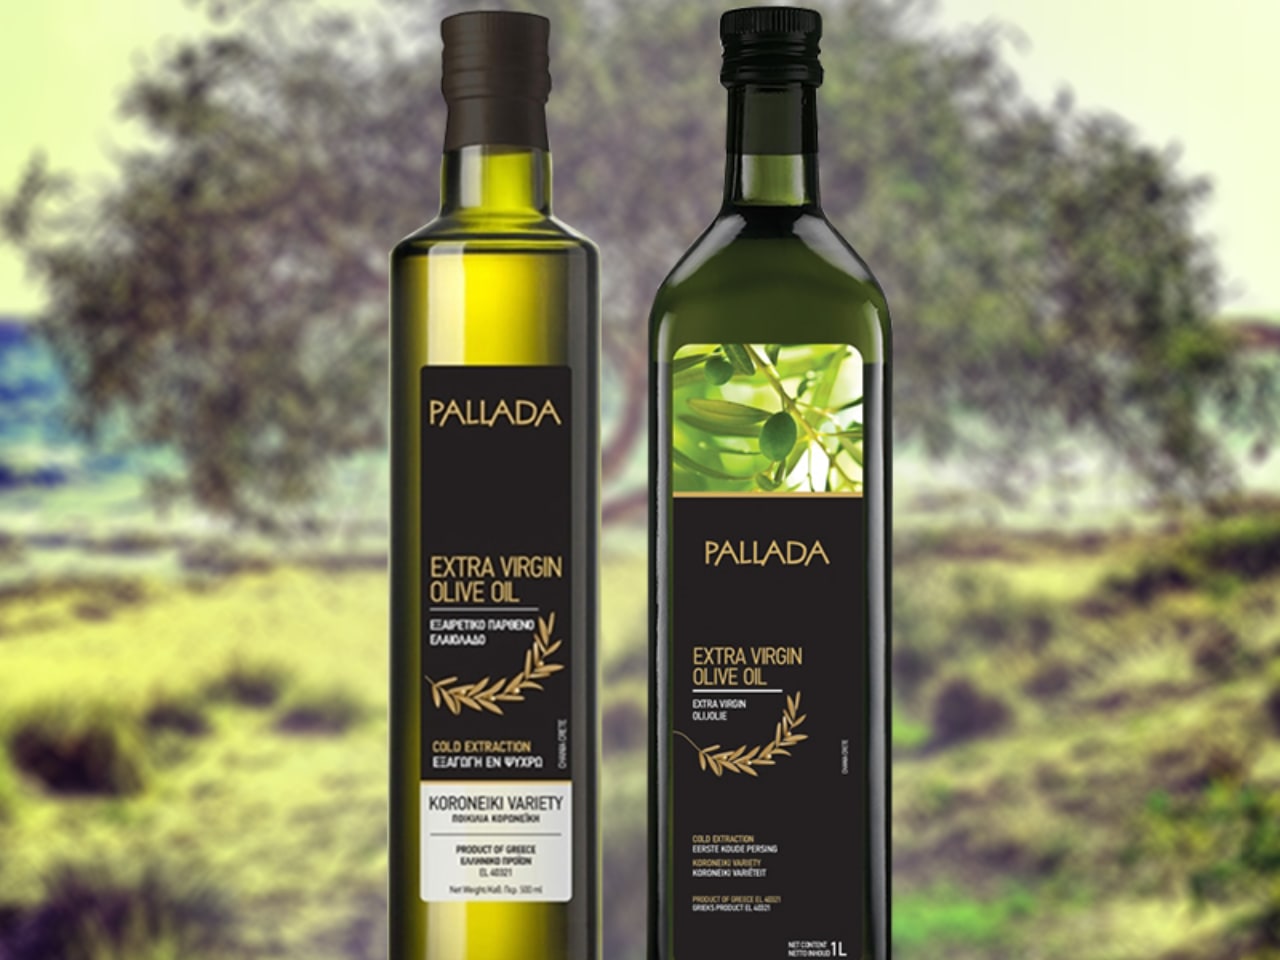 Olive Oil Tasting Tours at Pallada Mill, chania olive oil tasting tours, tasting extra virgin olive oil chania crete, activities chania crete, best organic olive oil tasting tour chania, cretan olive oil activity, things to do chania crete